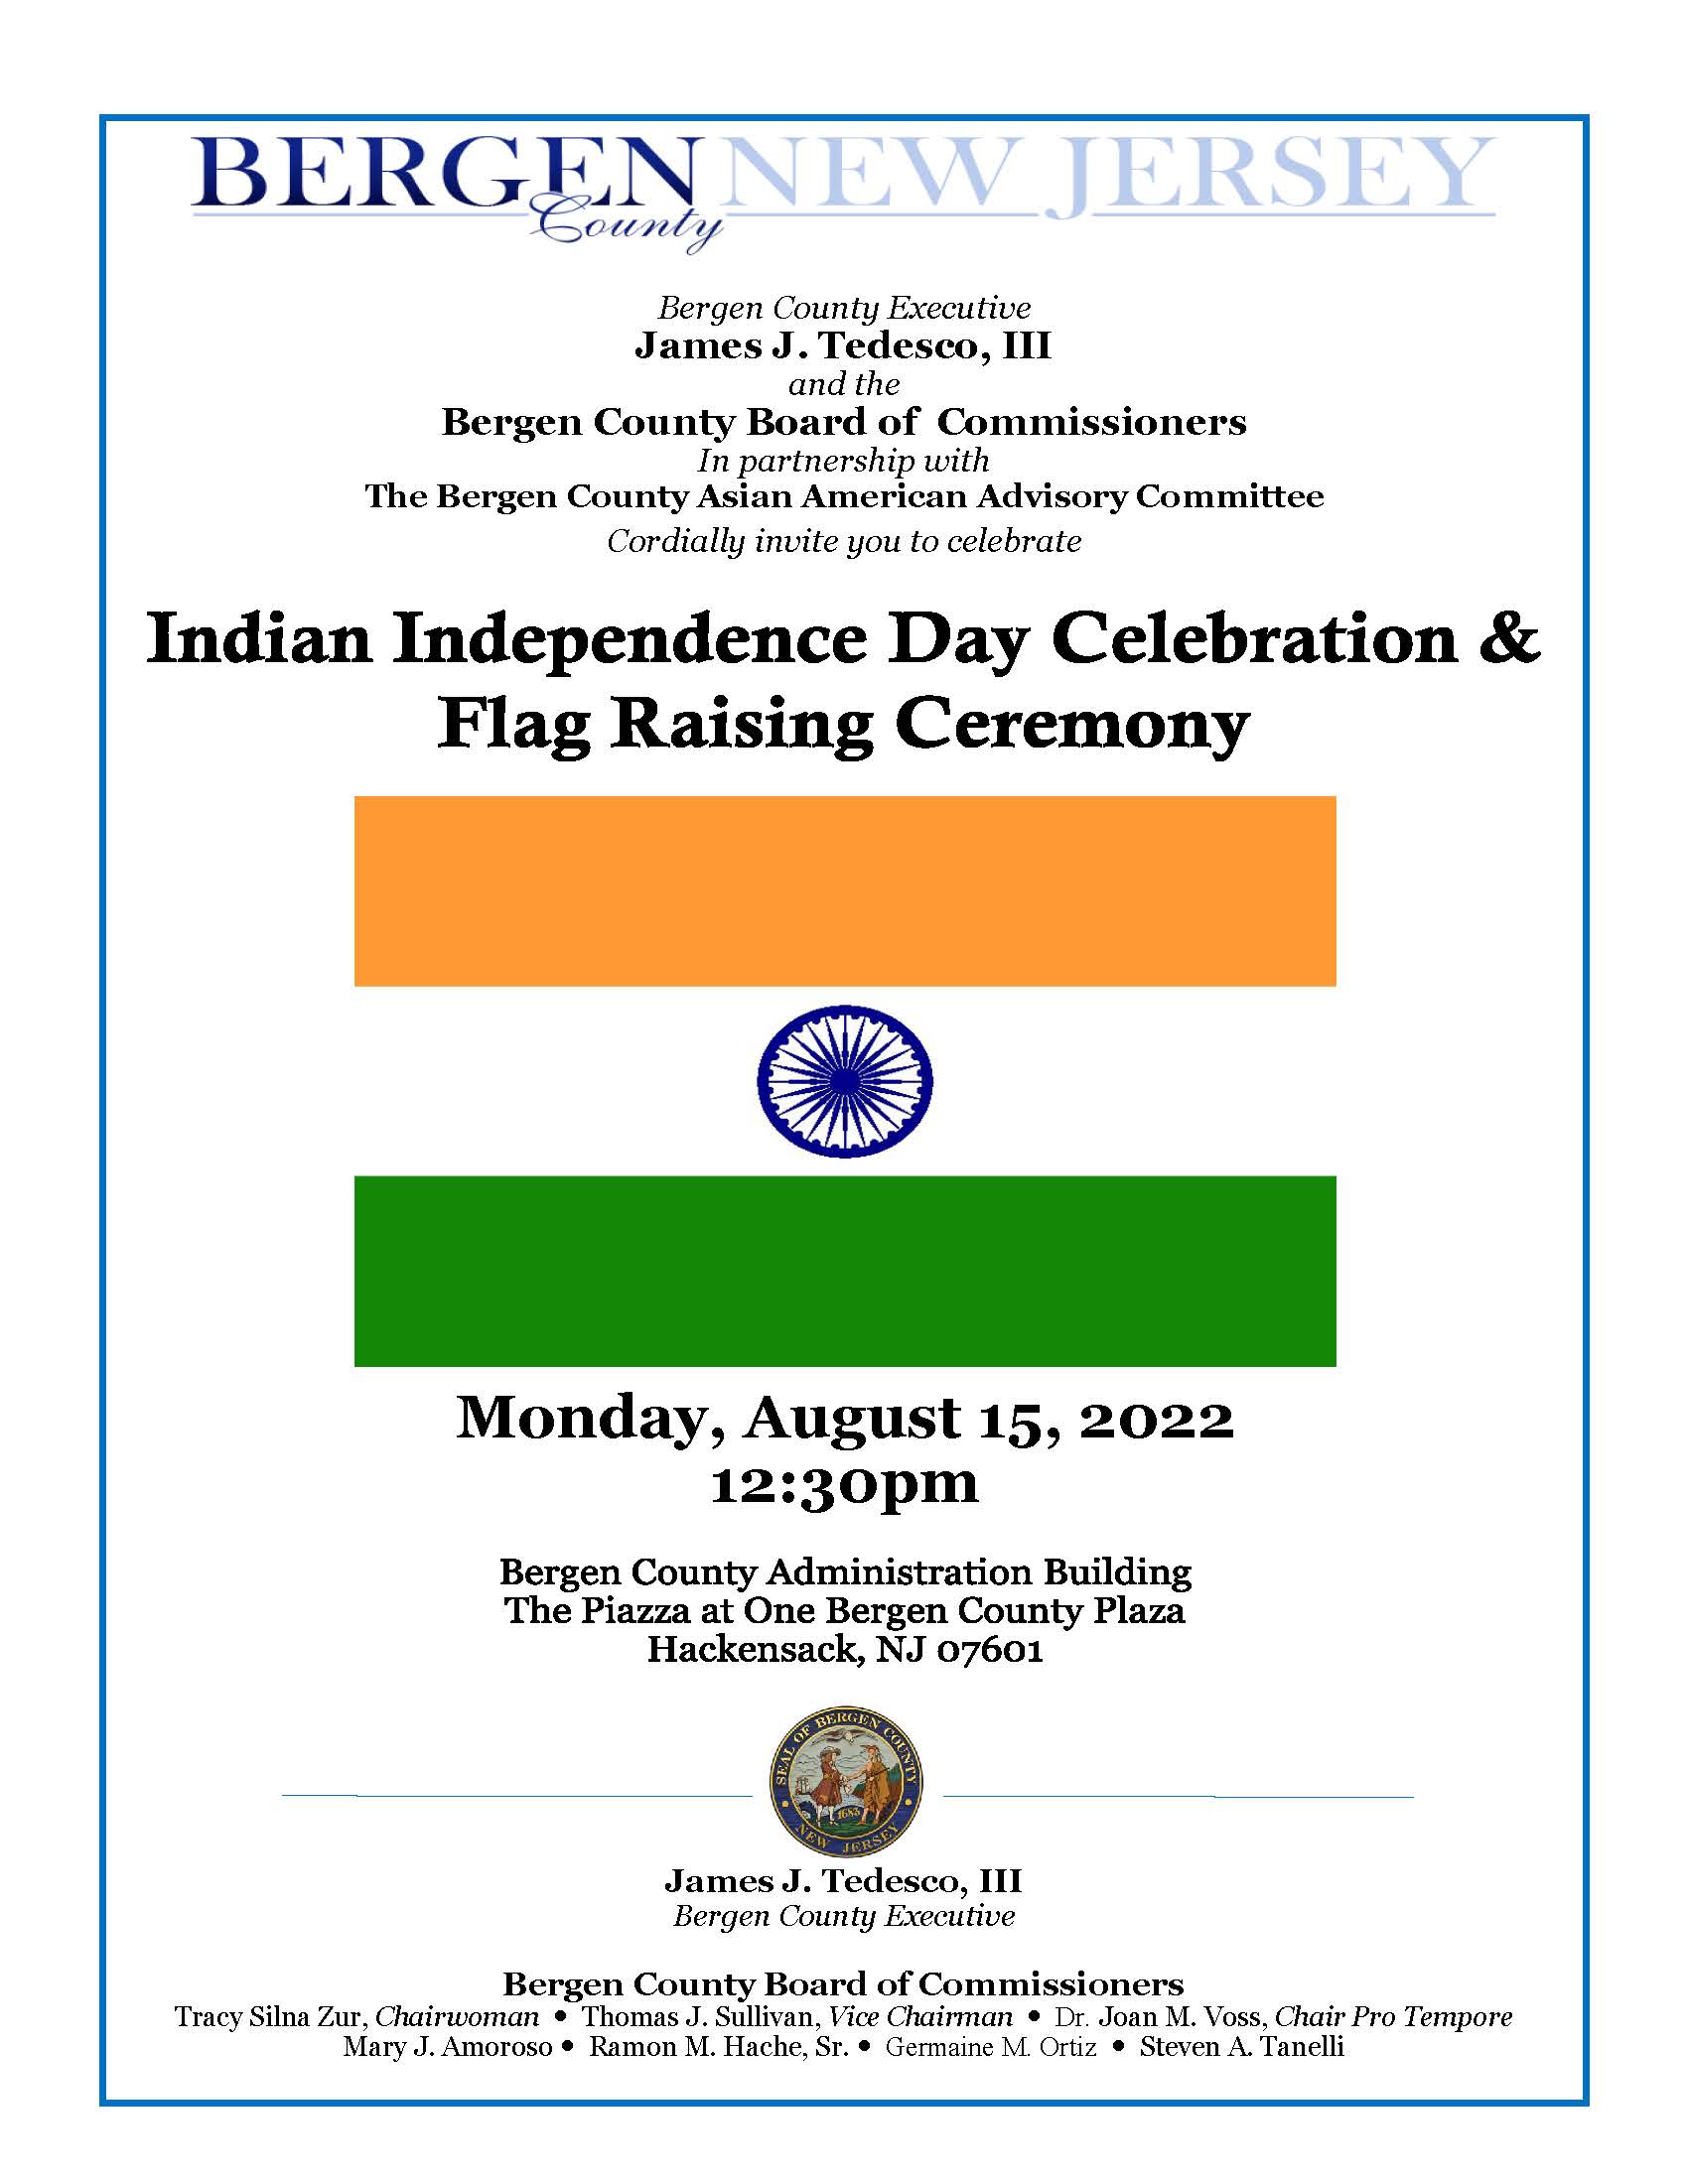 2022 indian independence day and flag raising ceremony